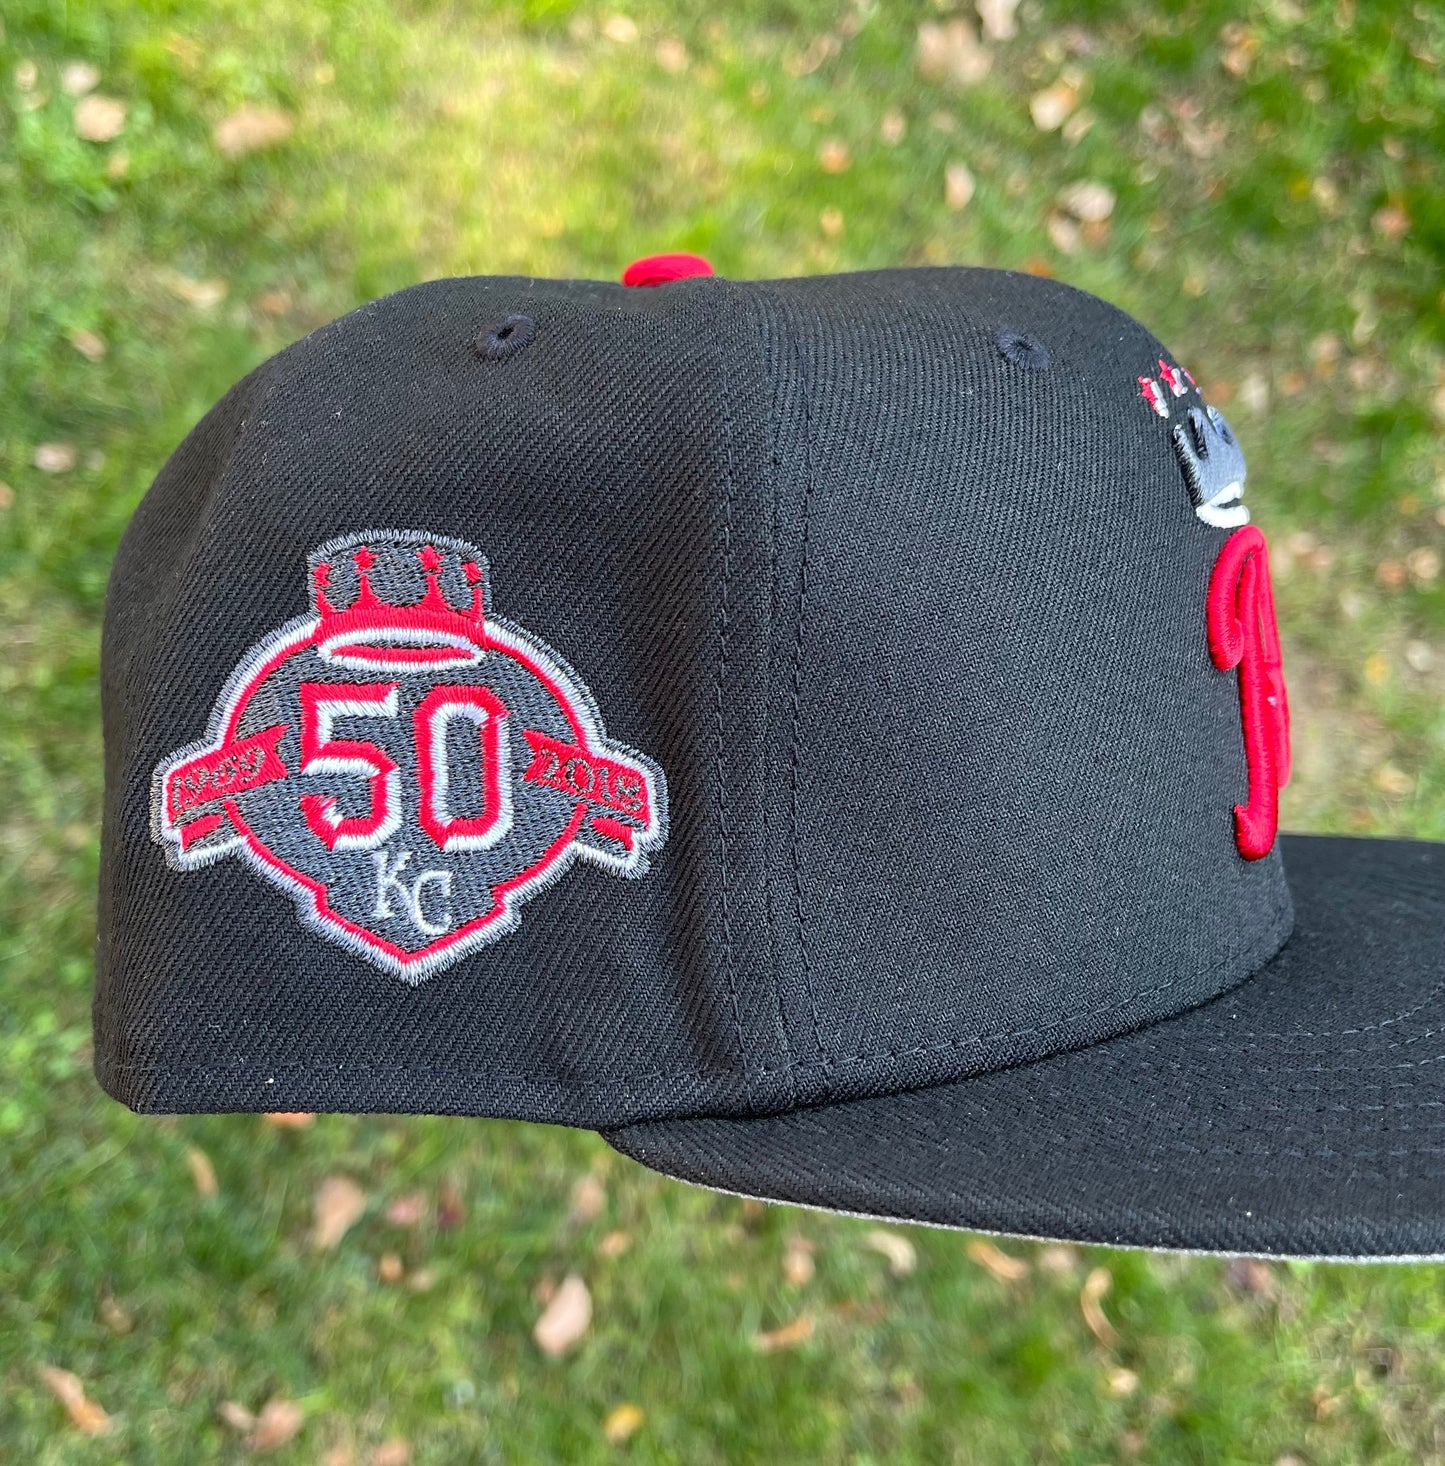 Kansas City Royals 50th Anniversary Side Patch Fitted Hat New Era 5950 (Black/Red/Gray)